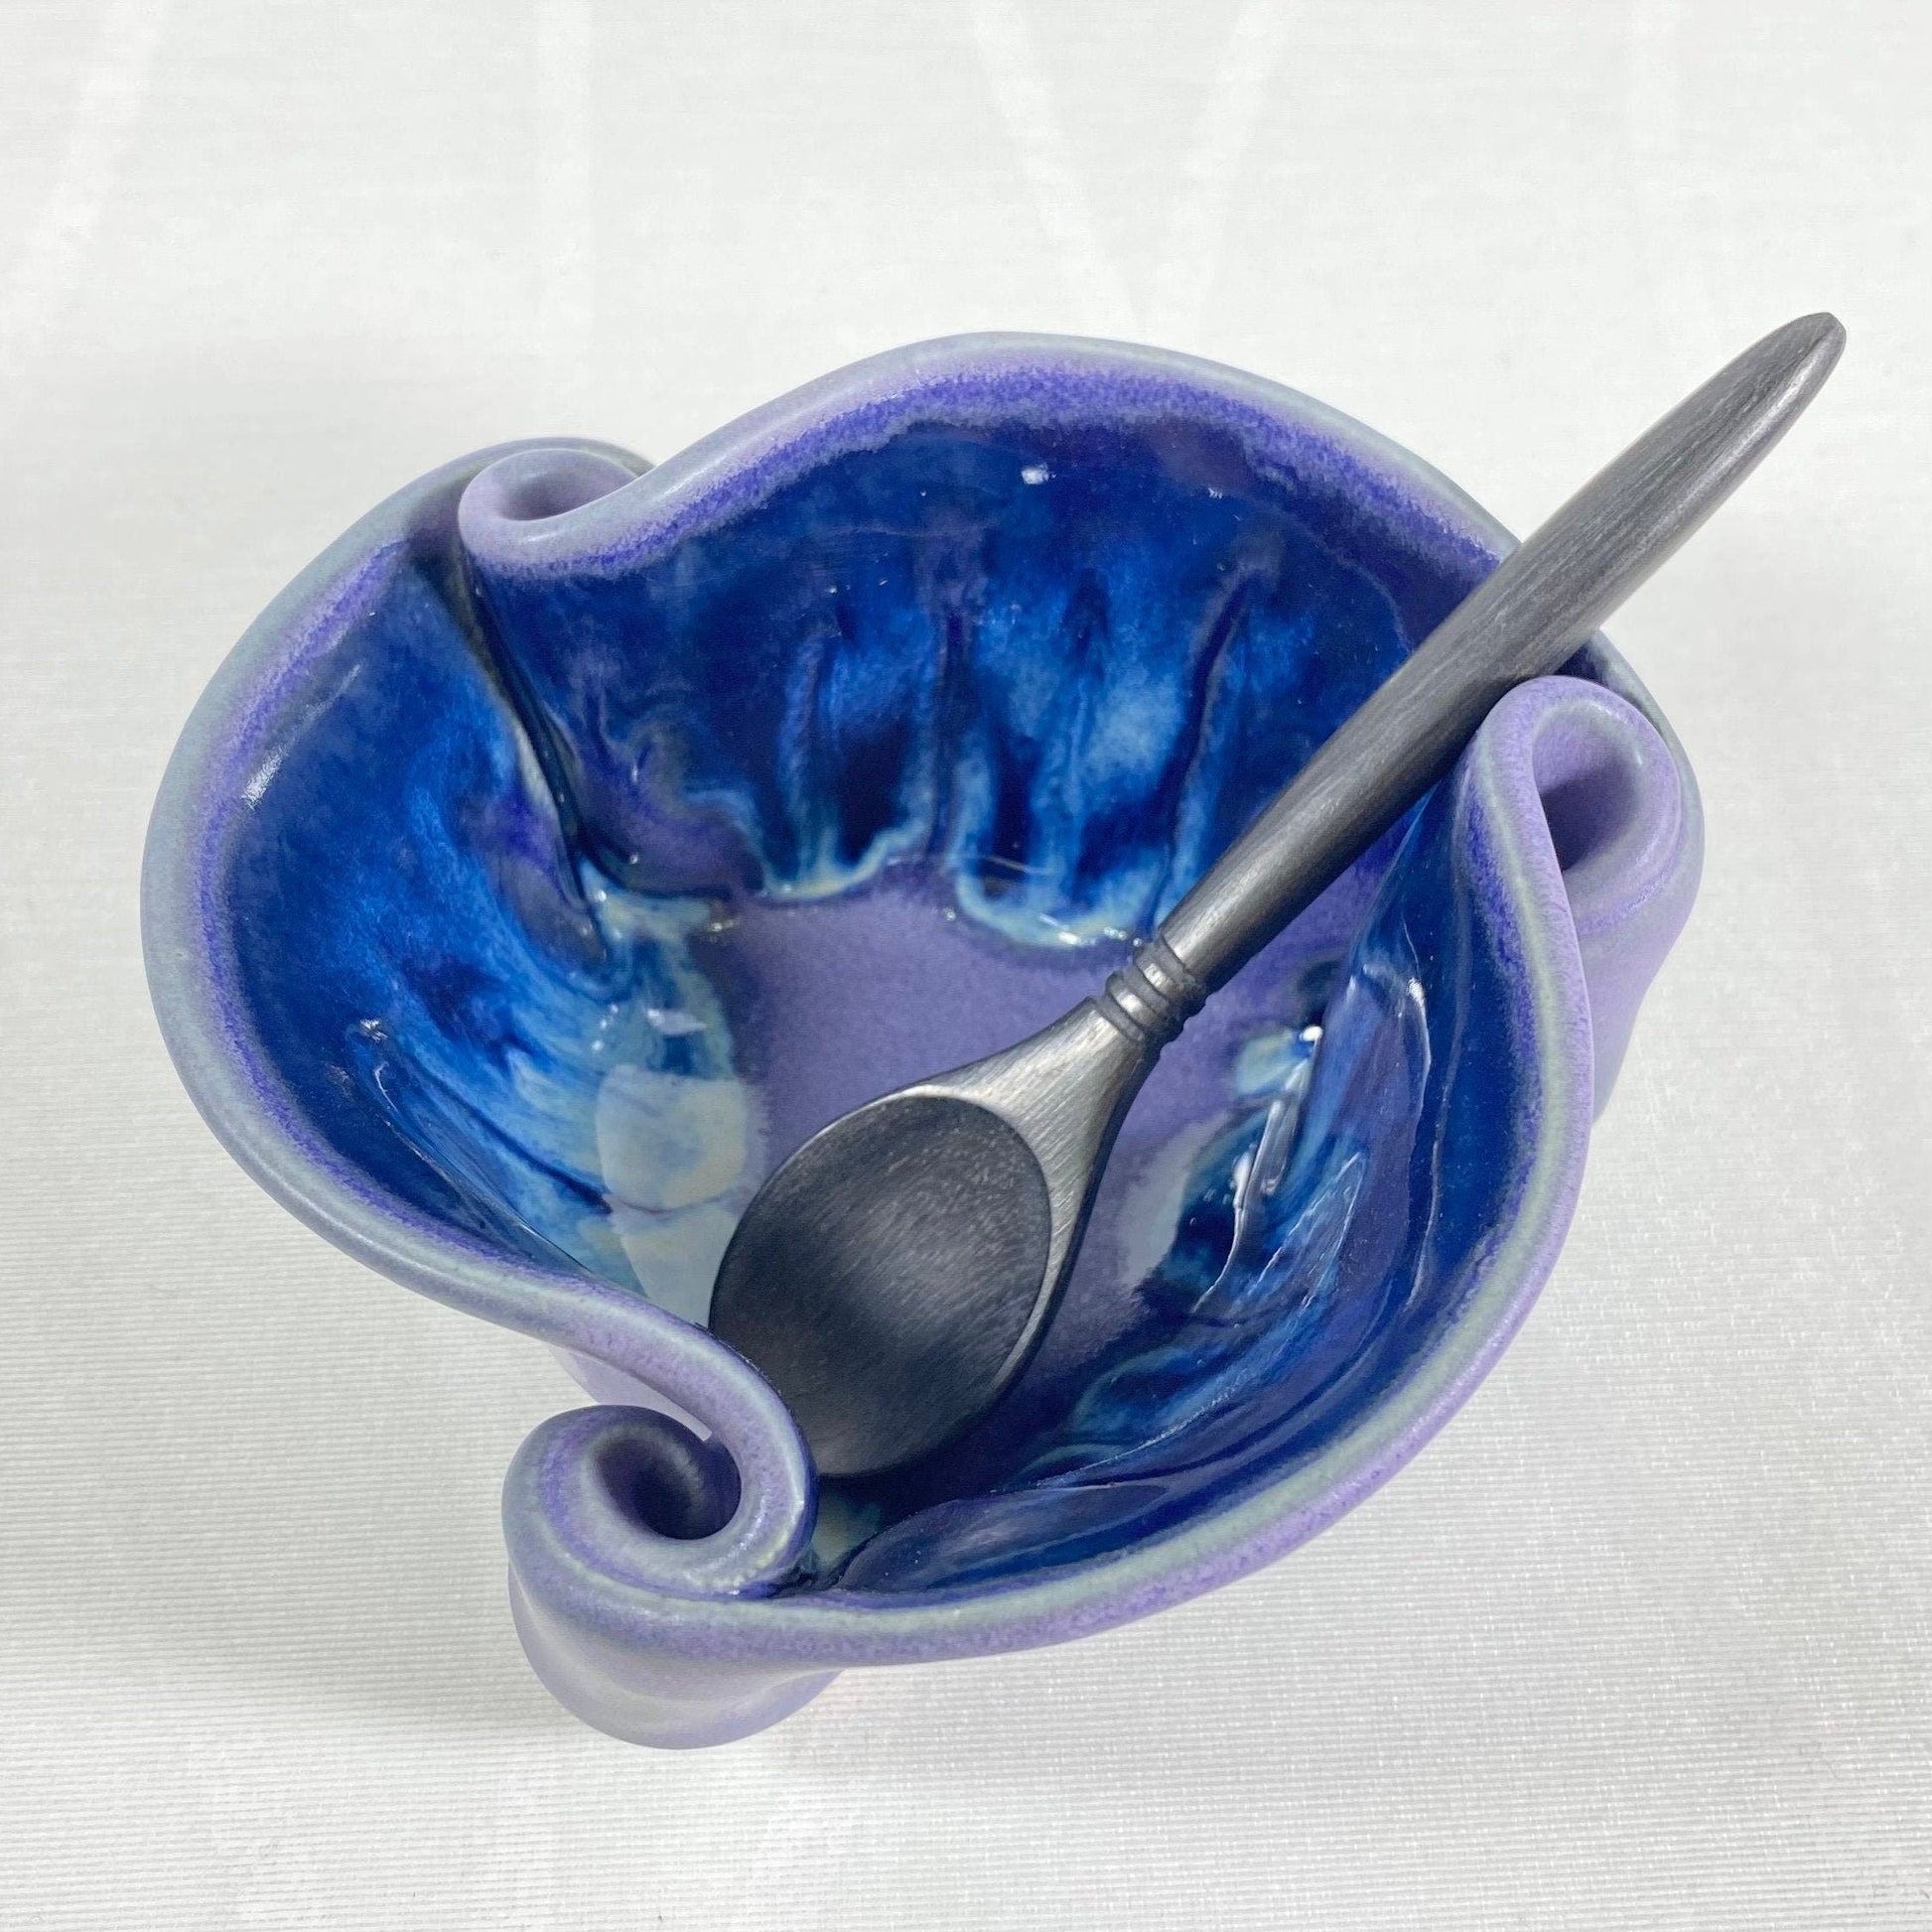 Handmade Purple and Blue Pot/Dish with Serving Spoon, Functional and Decorative Pottery